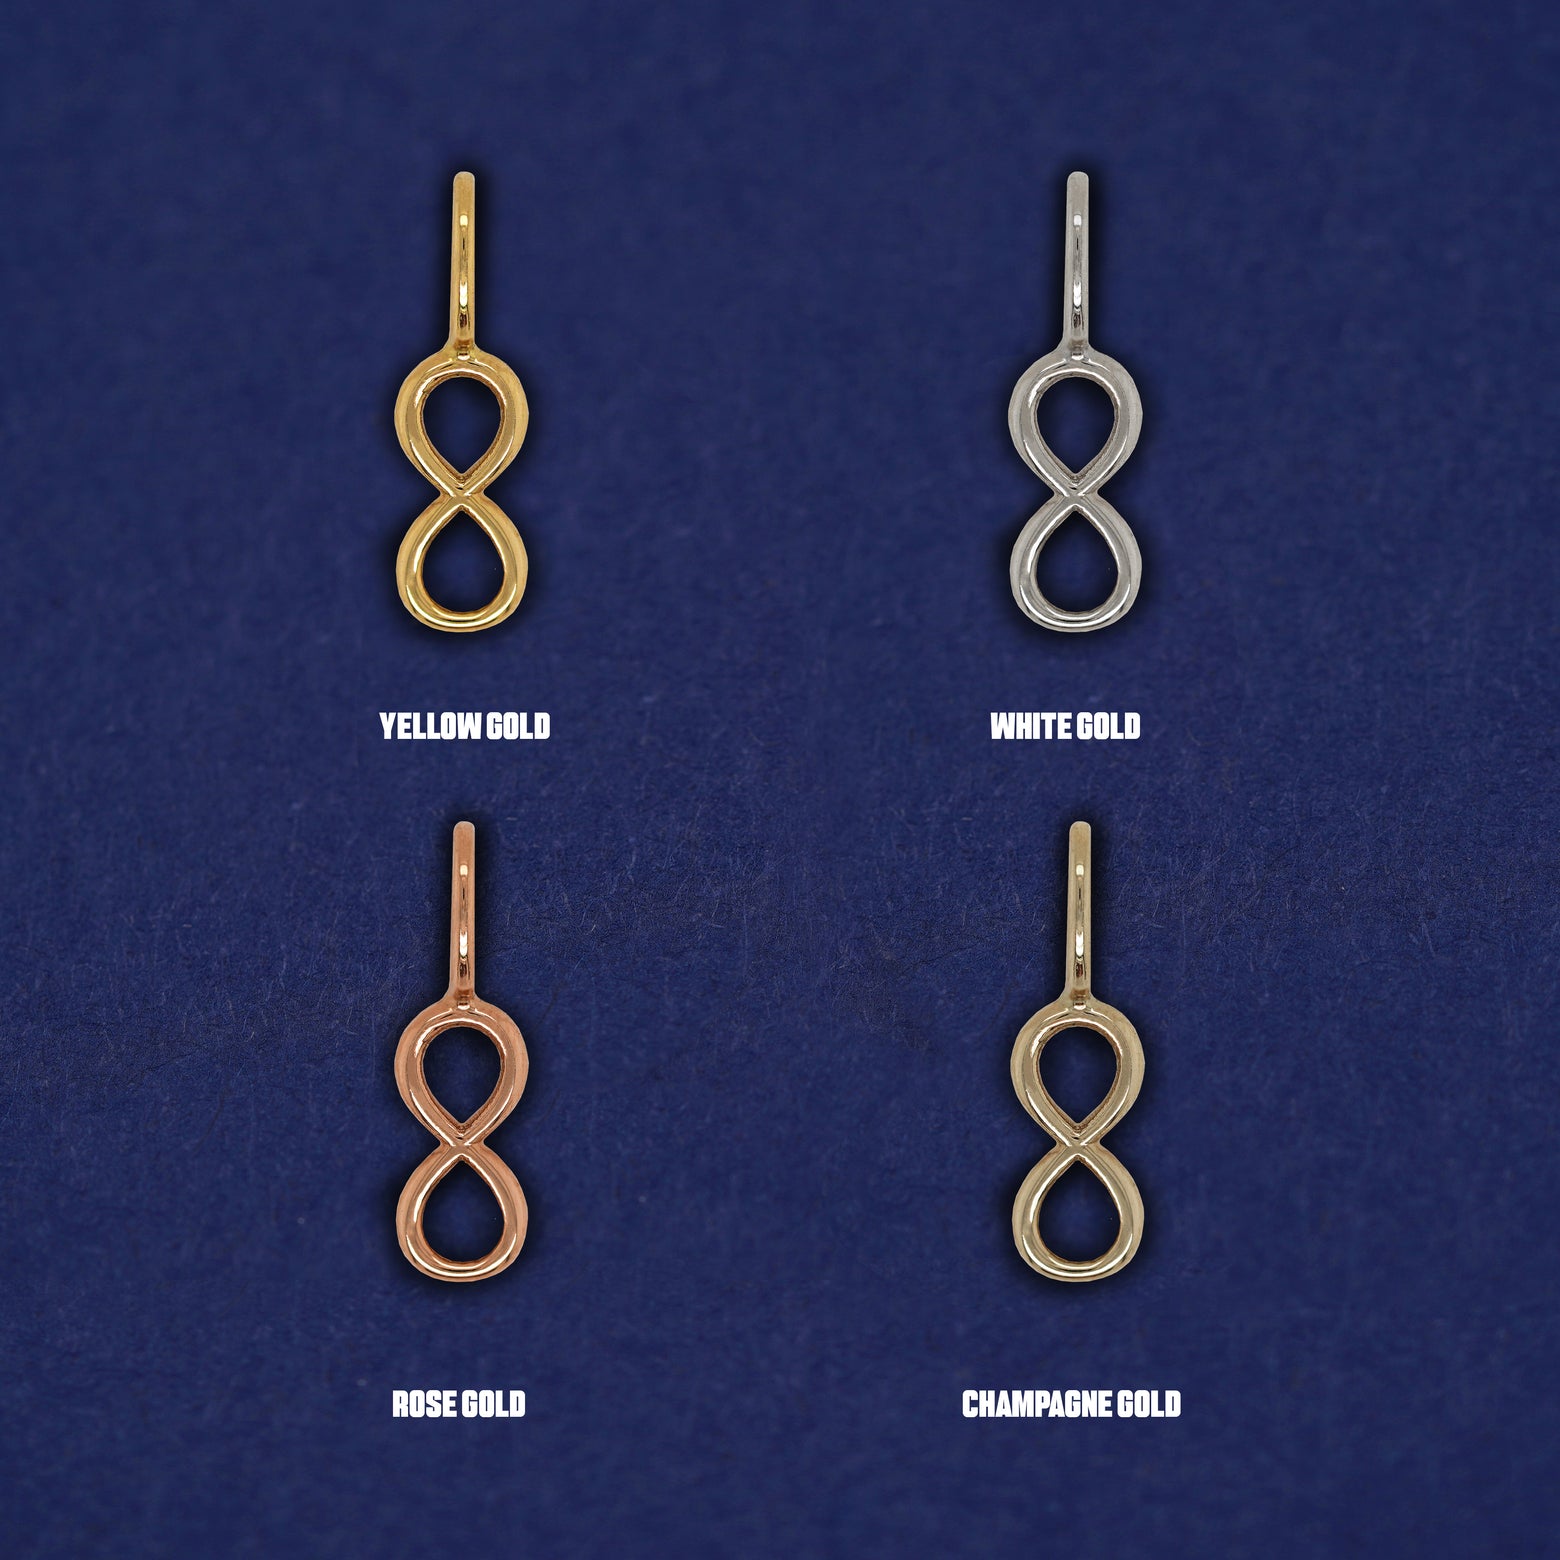 Four versions of the Infinity Charm shown in options of yellow, white, rose, and champagne gold